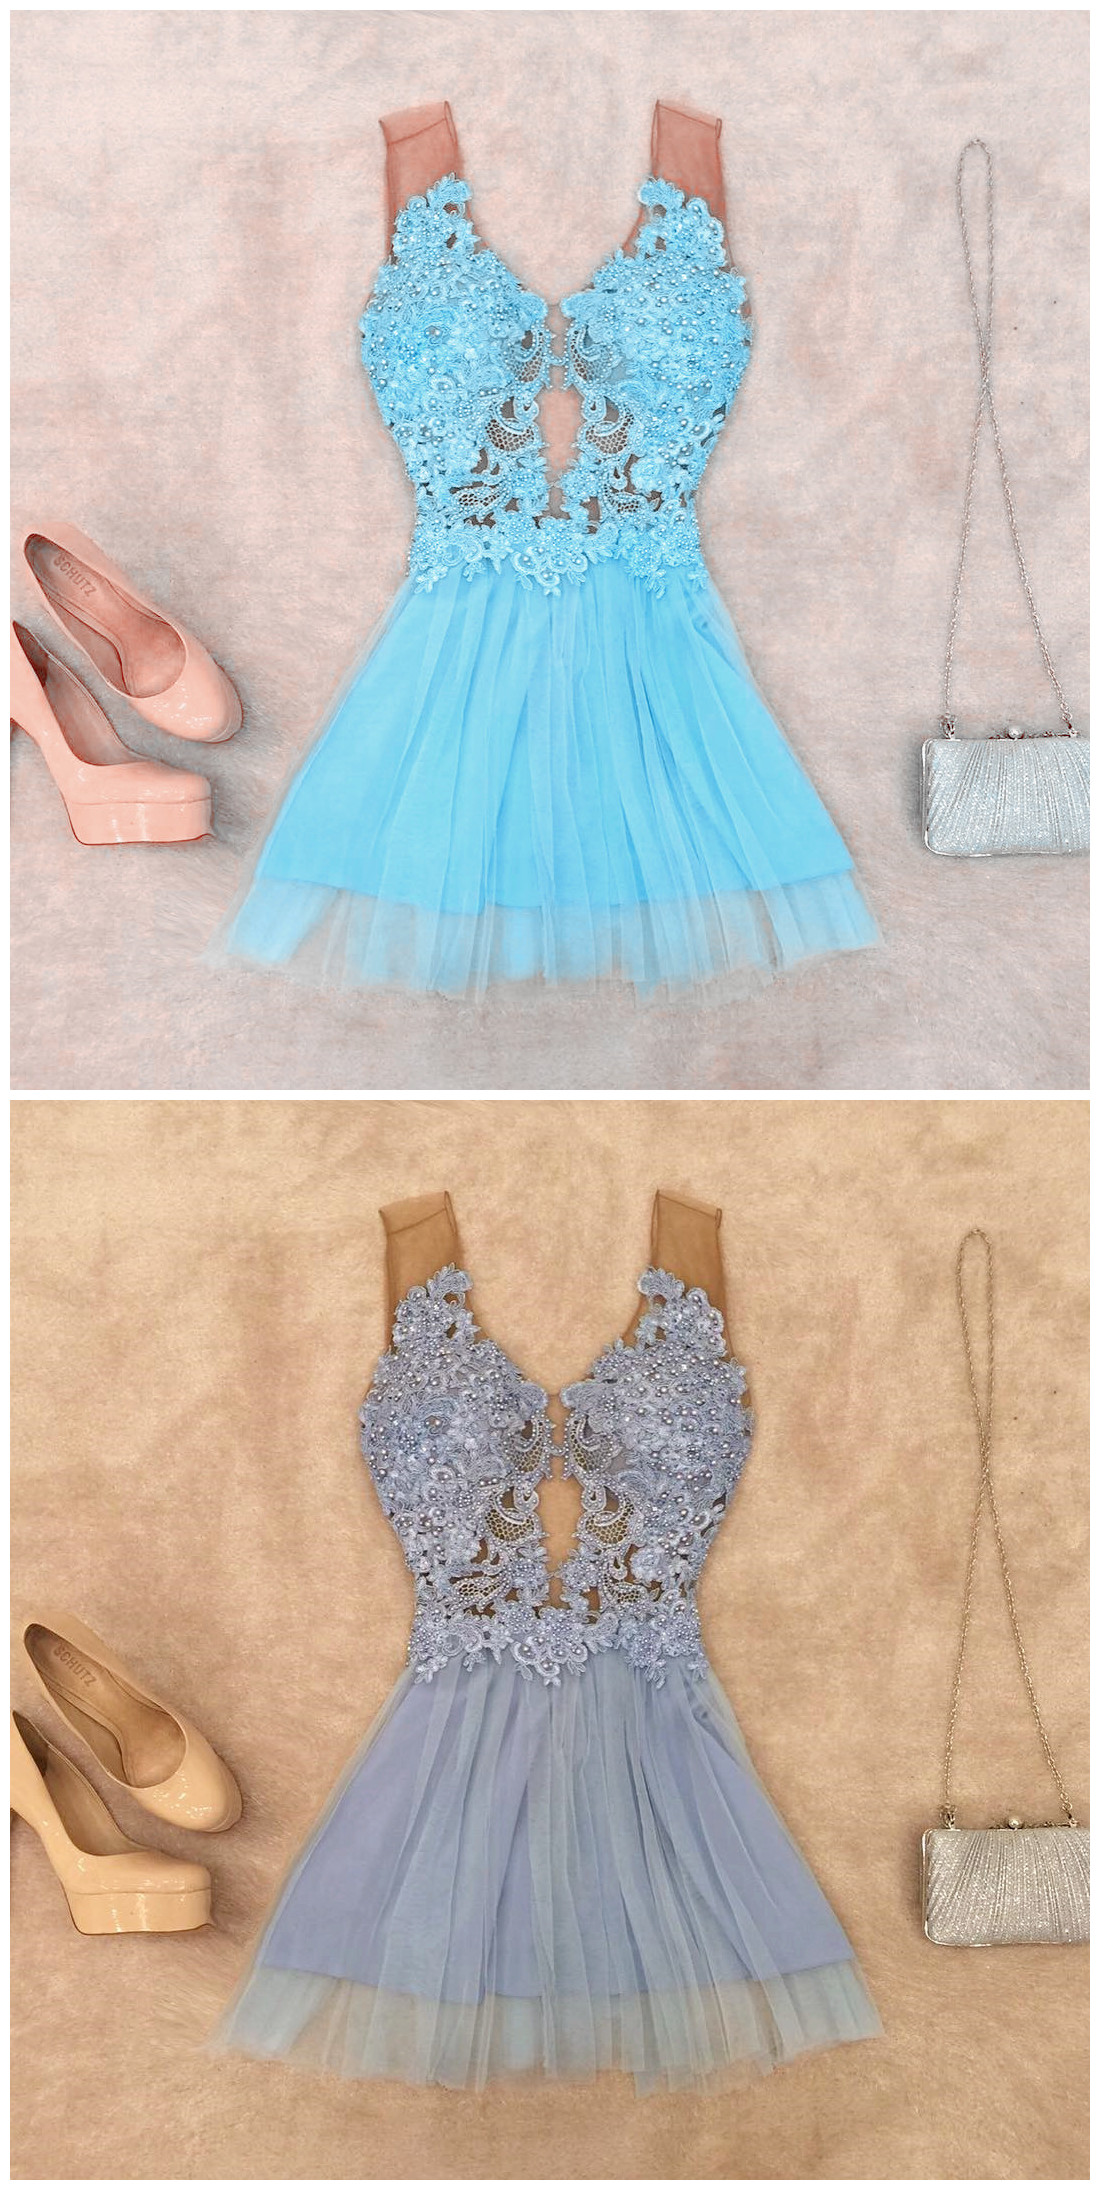 Homecoming Dresses,turquoise Party Dresses,lace Beaded Homecoming Dresses,short Sweetheart Prom Dress,elegant Prom Gowns 2017,women's